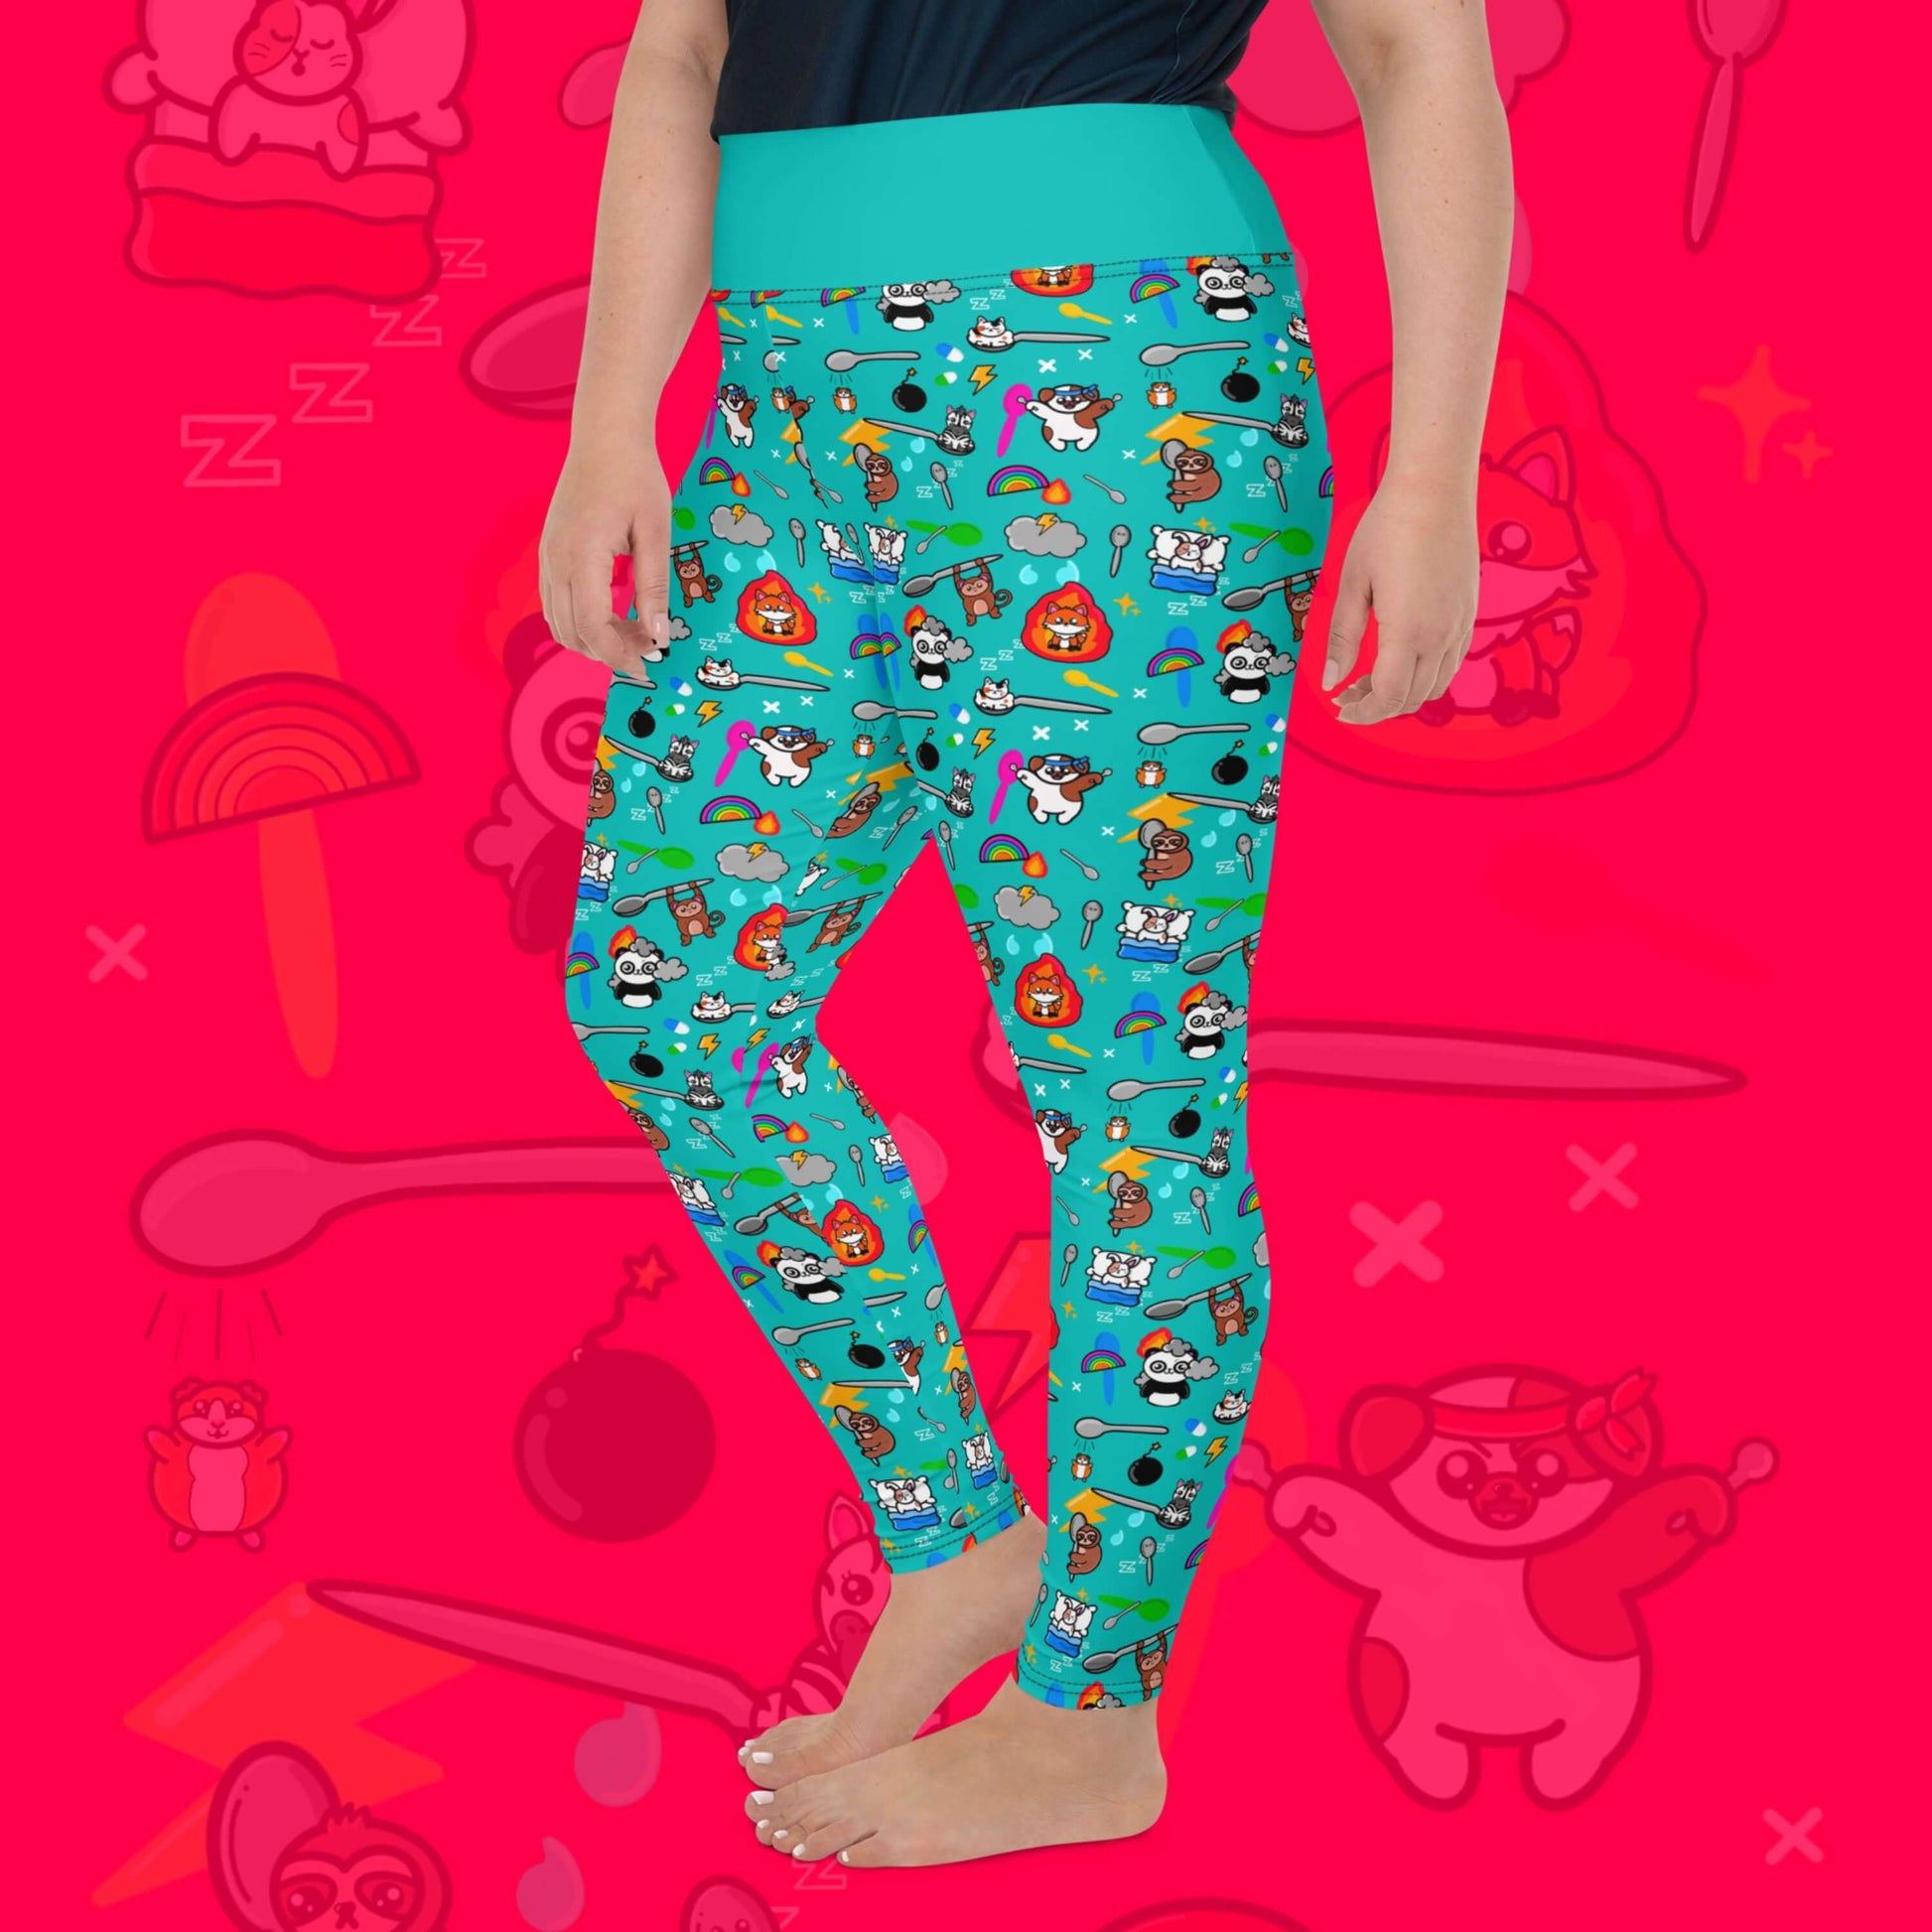 The Spoonie Plus Size Leggings modelled on a red background with a faded version of the print in the background. The blue leggings feature various invisible illness themed animals, rainbows, spoons, sparkles, flames, pills and lightning bolts. Raising awareness for hidden disabilities.